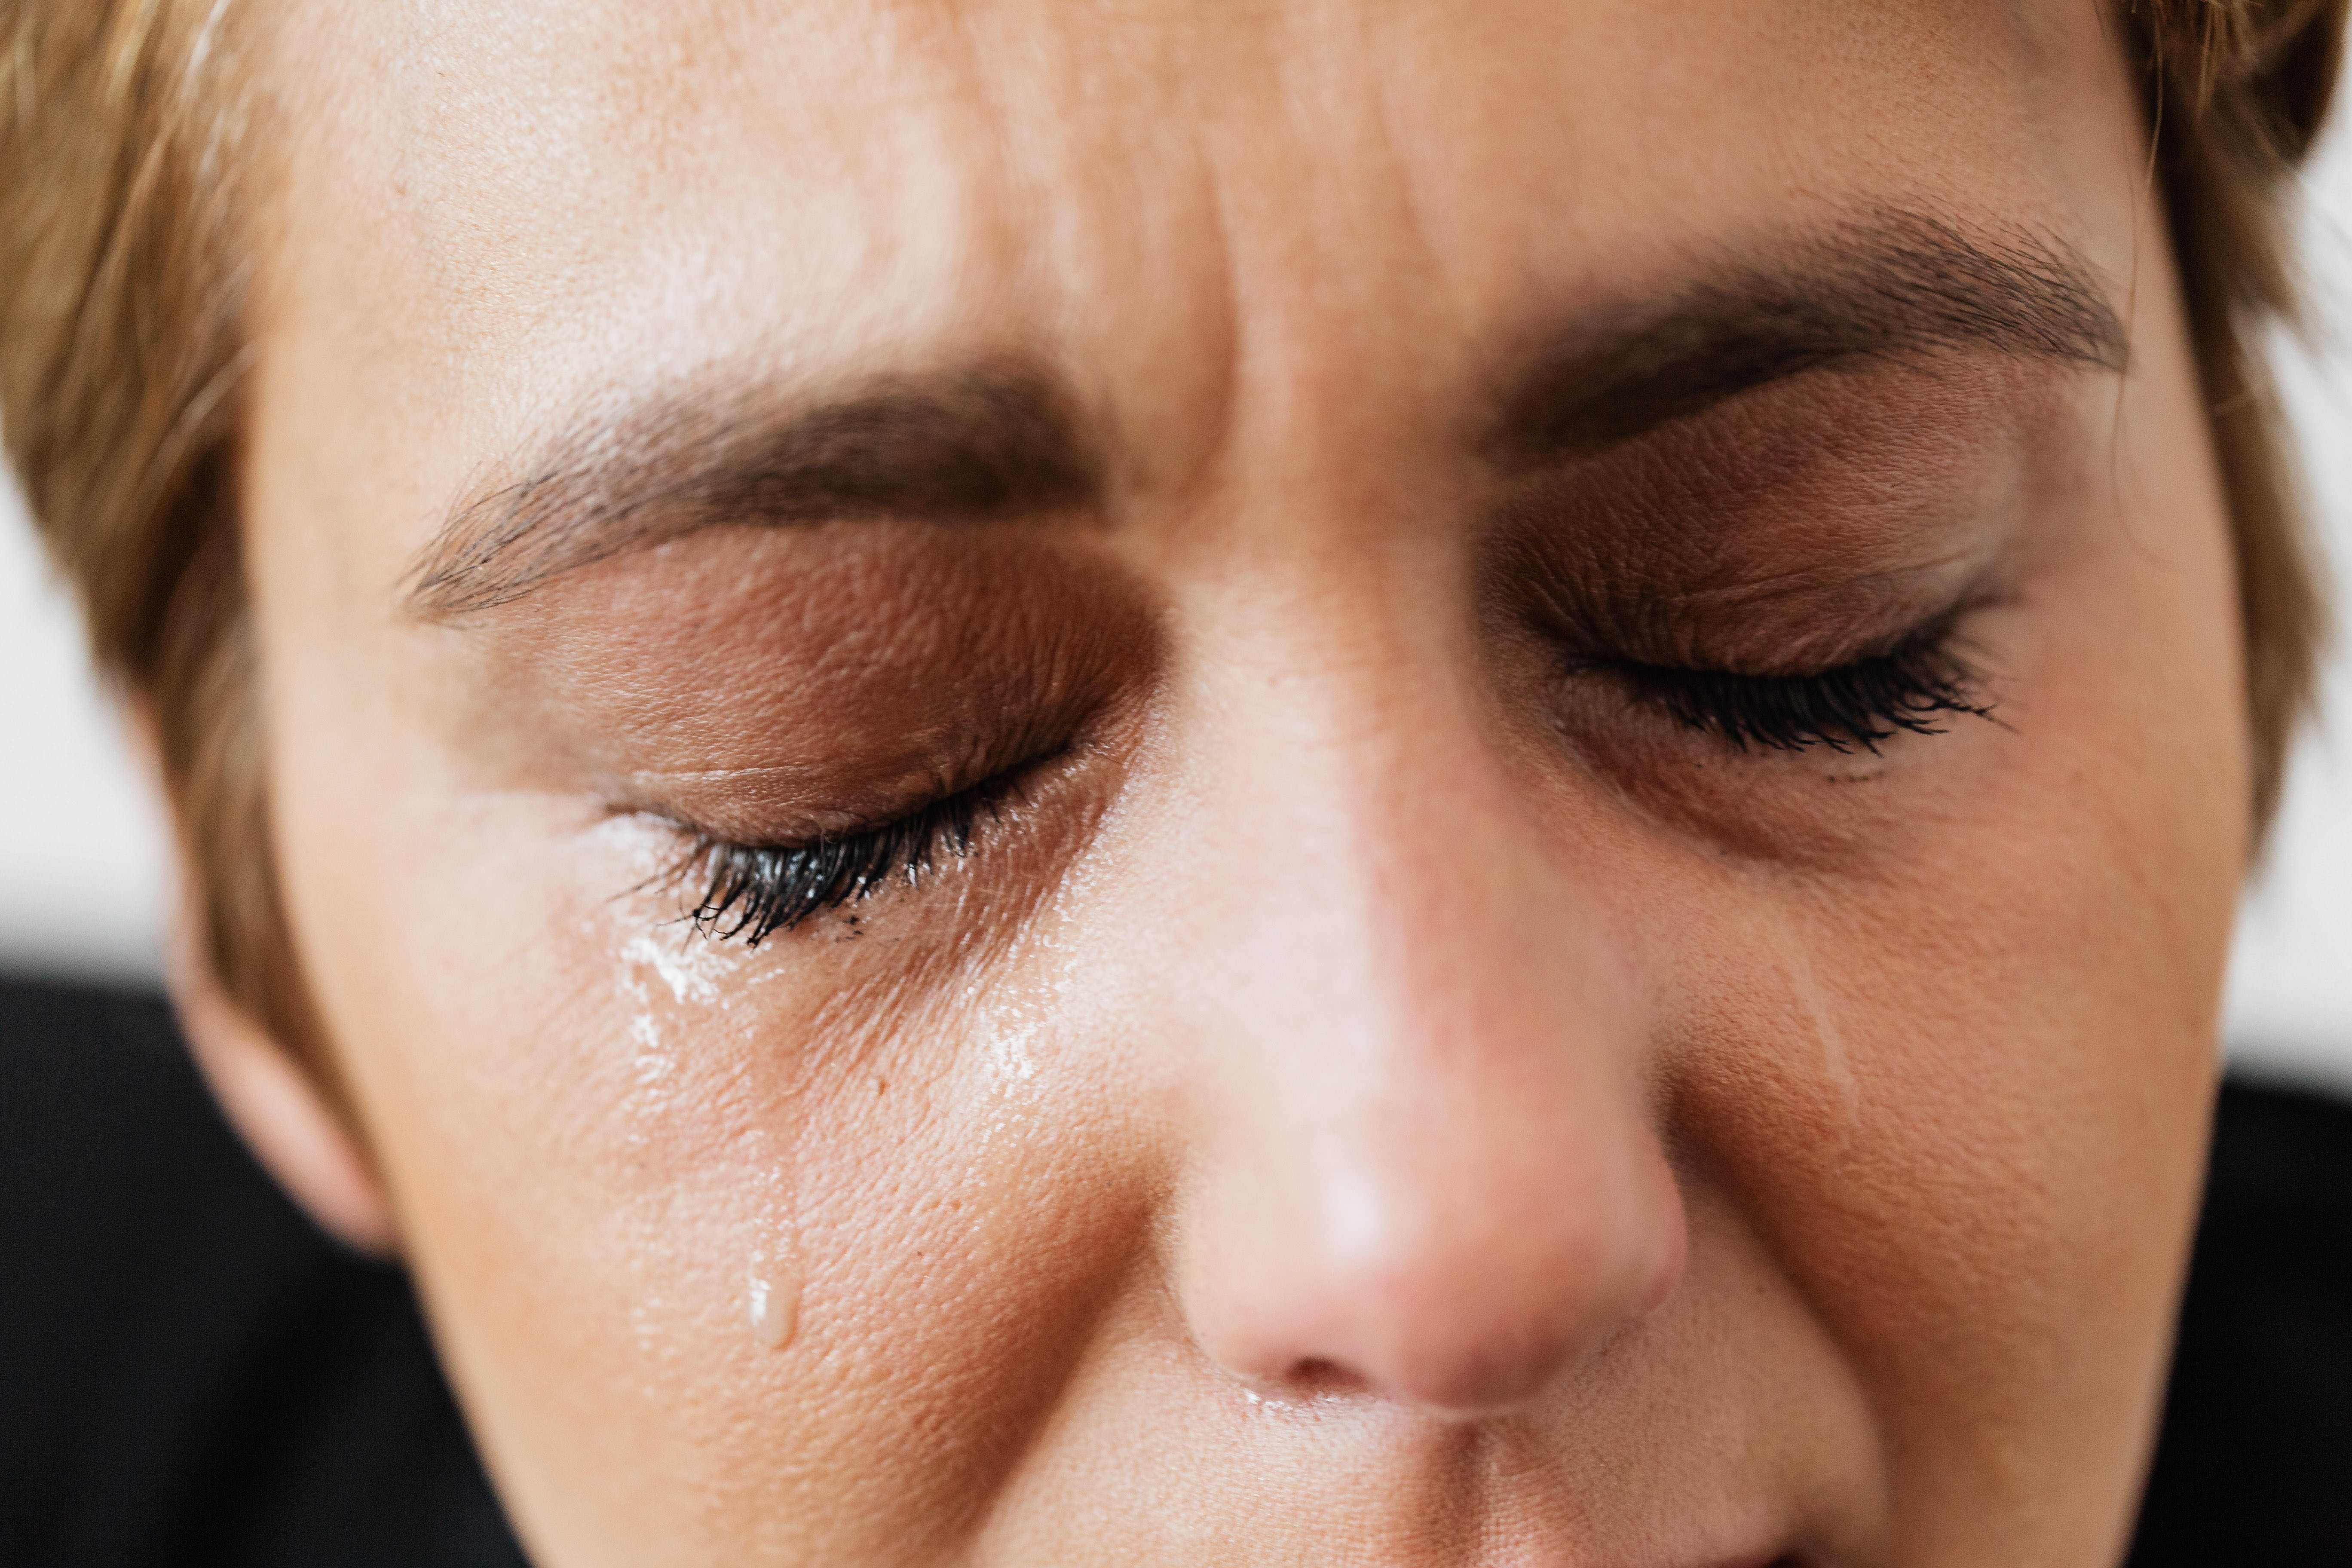 A woman has tears running down her face with her eyes closed | Source: Pexels